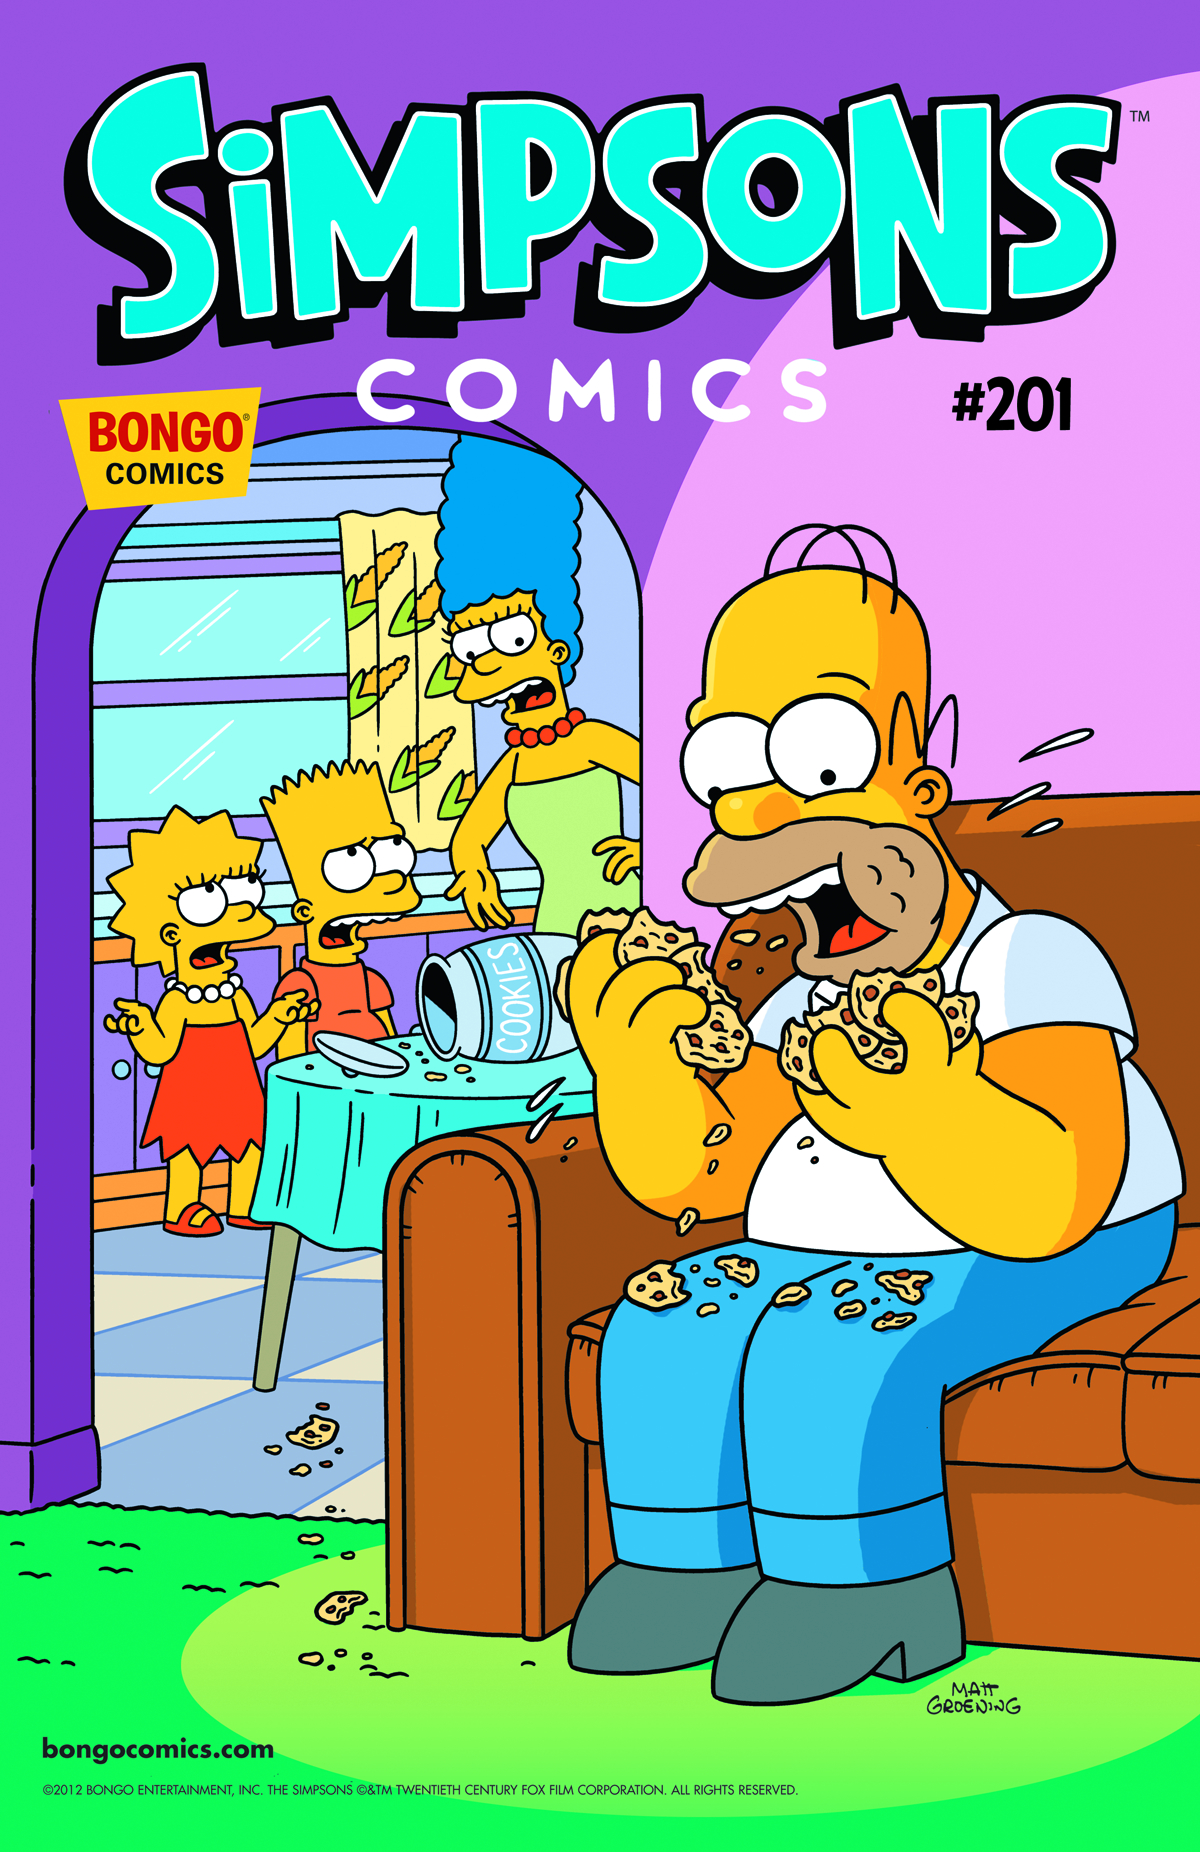 The simpsons old habits